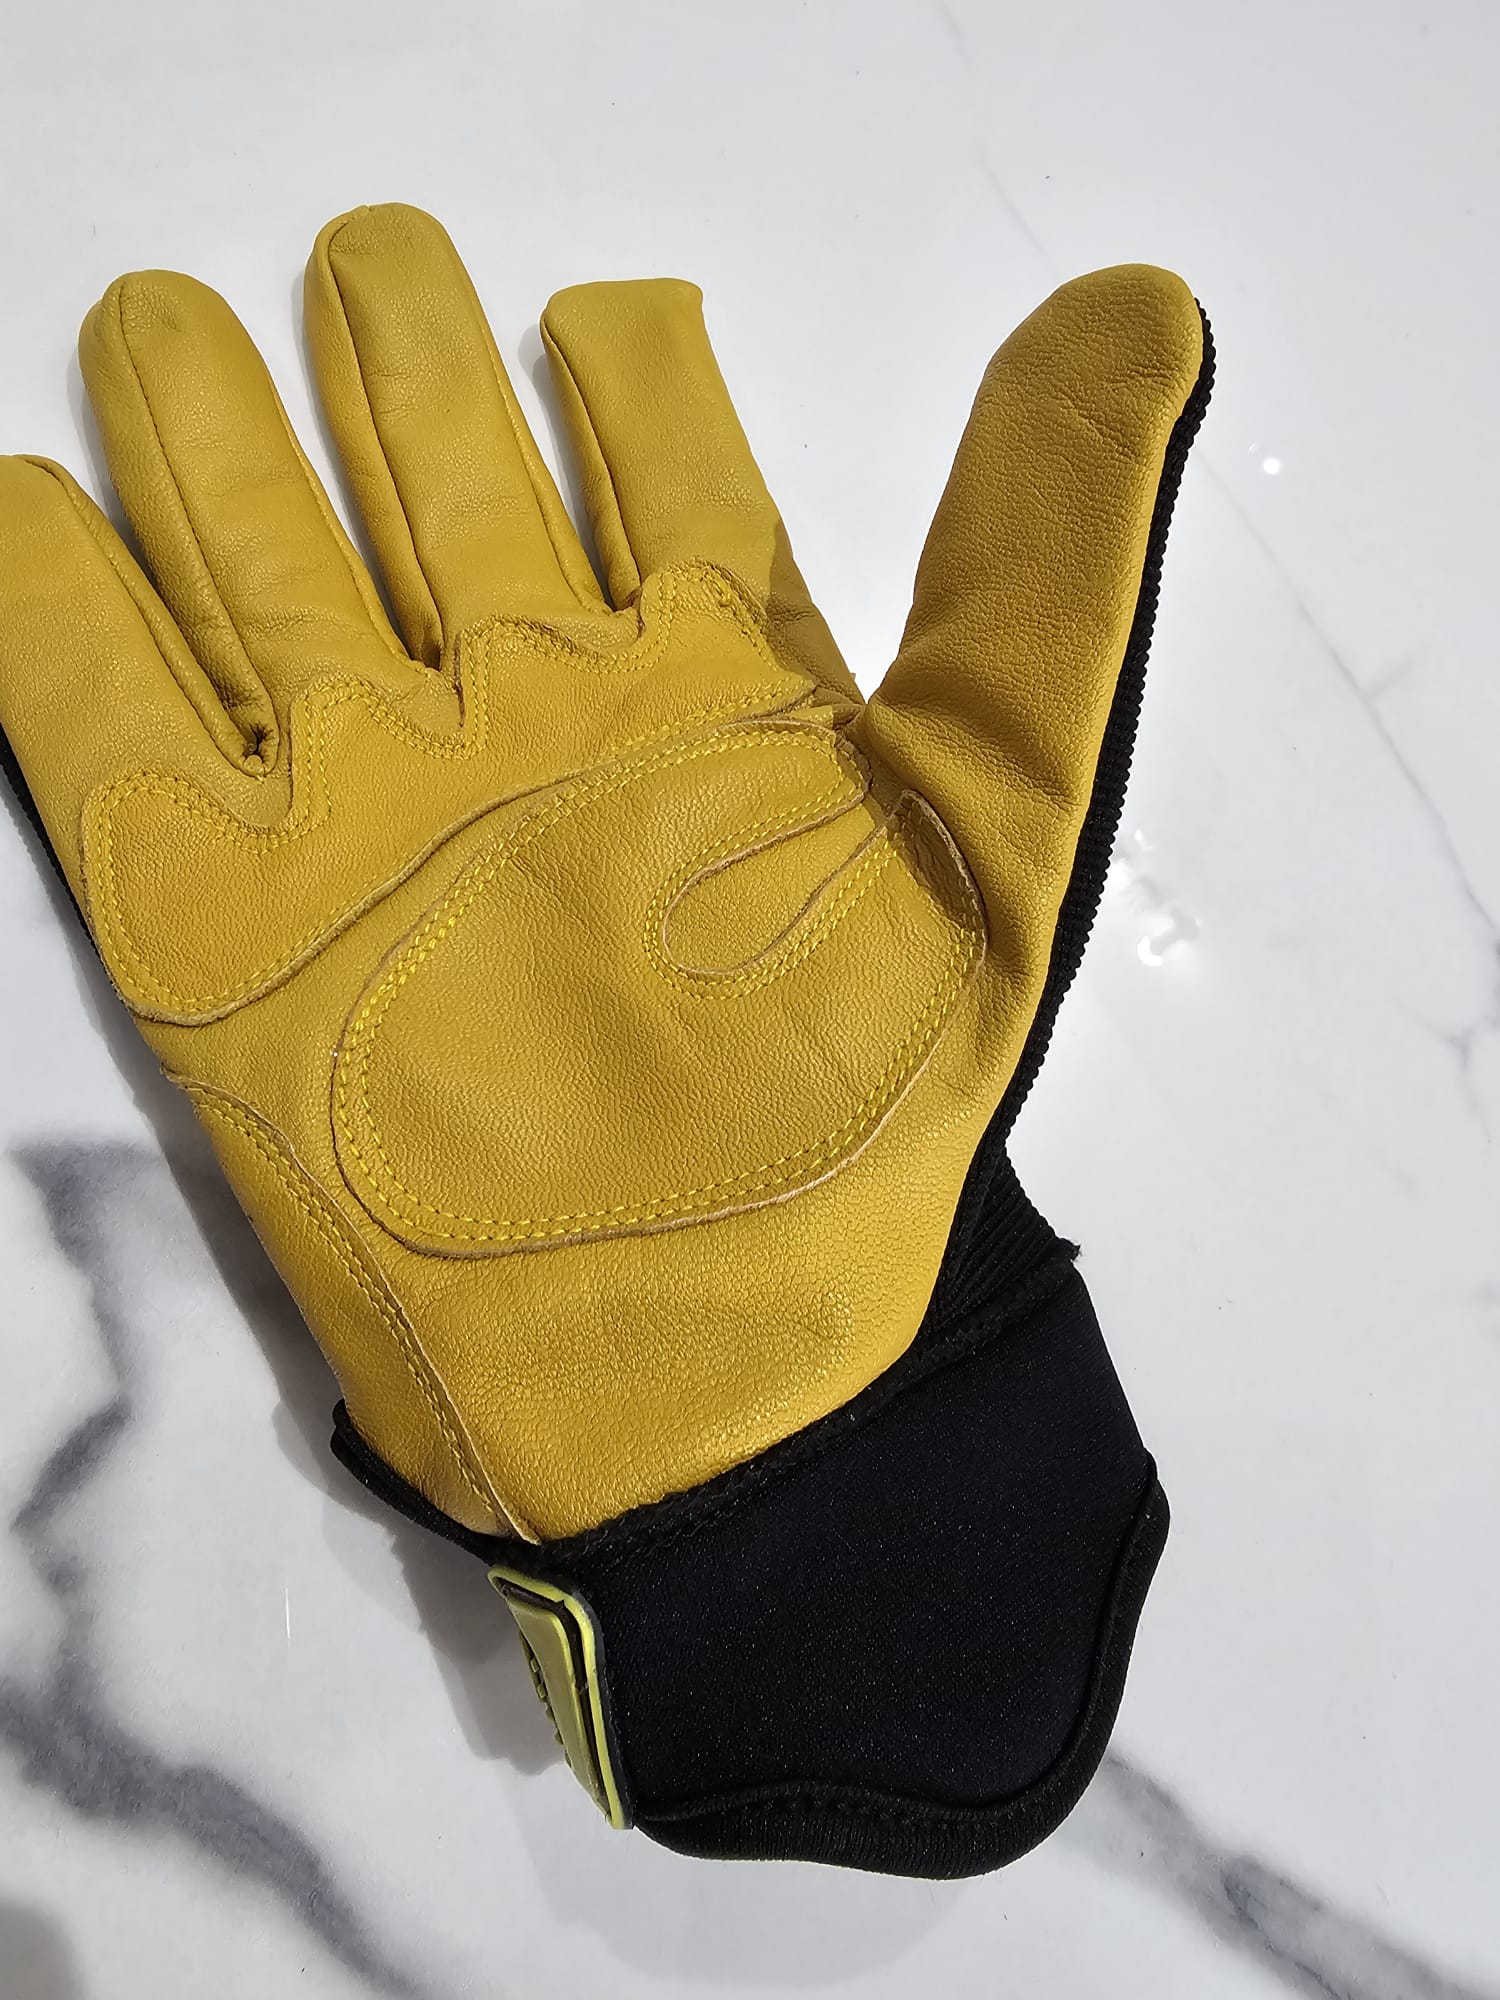 Durable and stylish Master Safety Gloves in a striking yellow and black combination, featuring Gost crust leather palms for toughness. Ideal for DIY, gardening, labor, construction, and roofing tasks, ensuring reliable hand protection during vigorous activities.